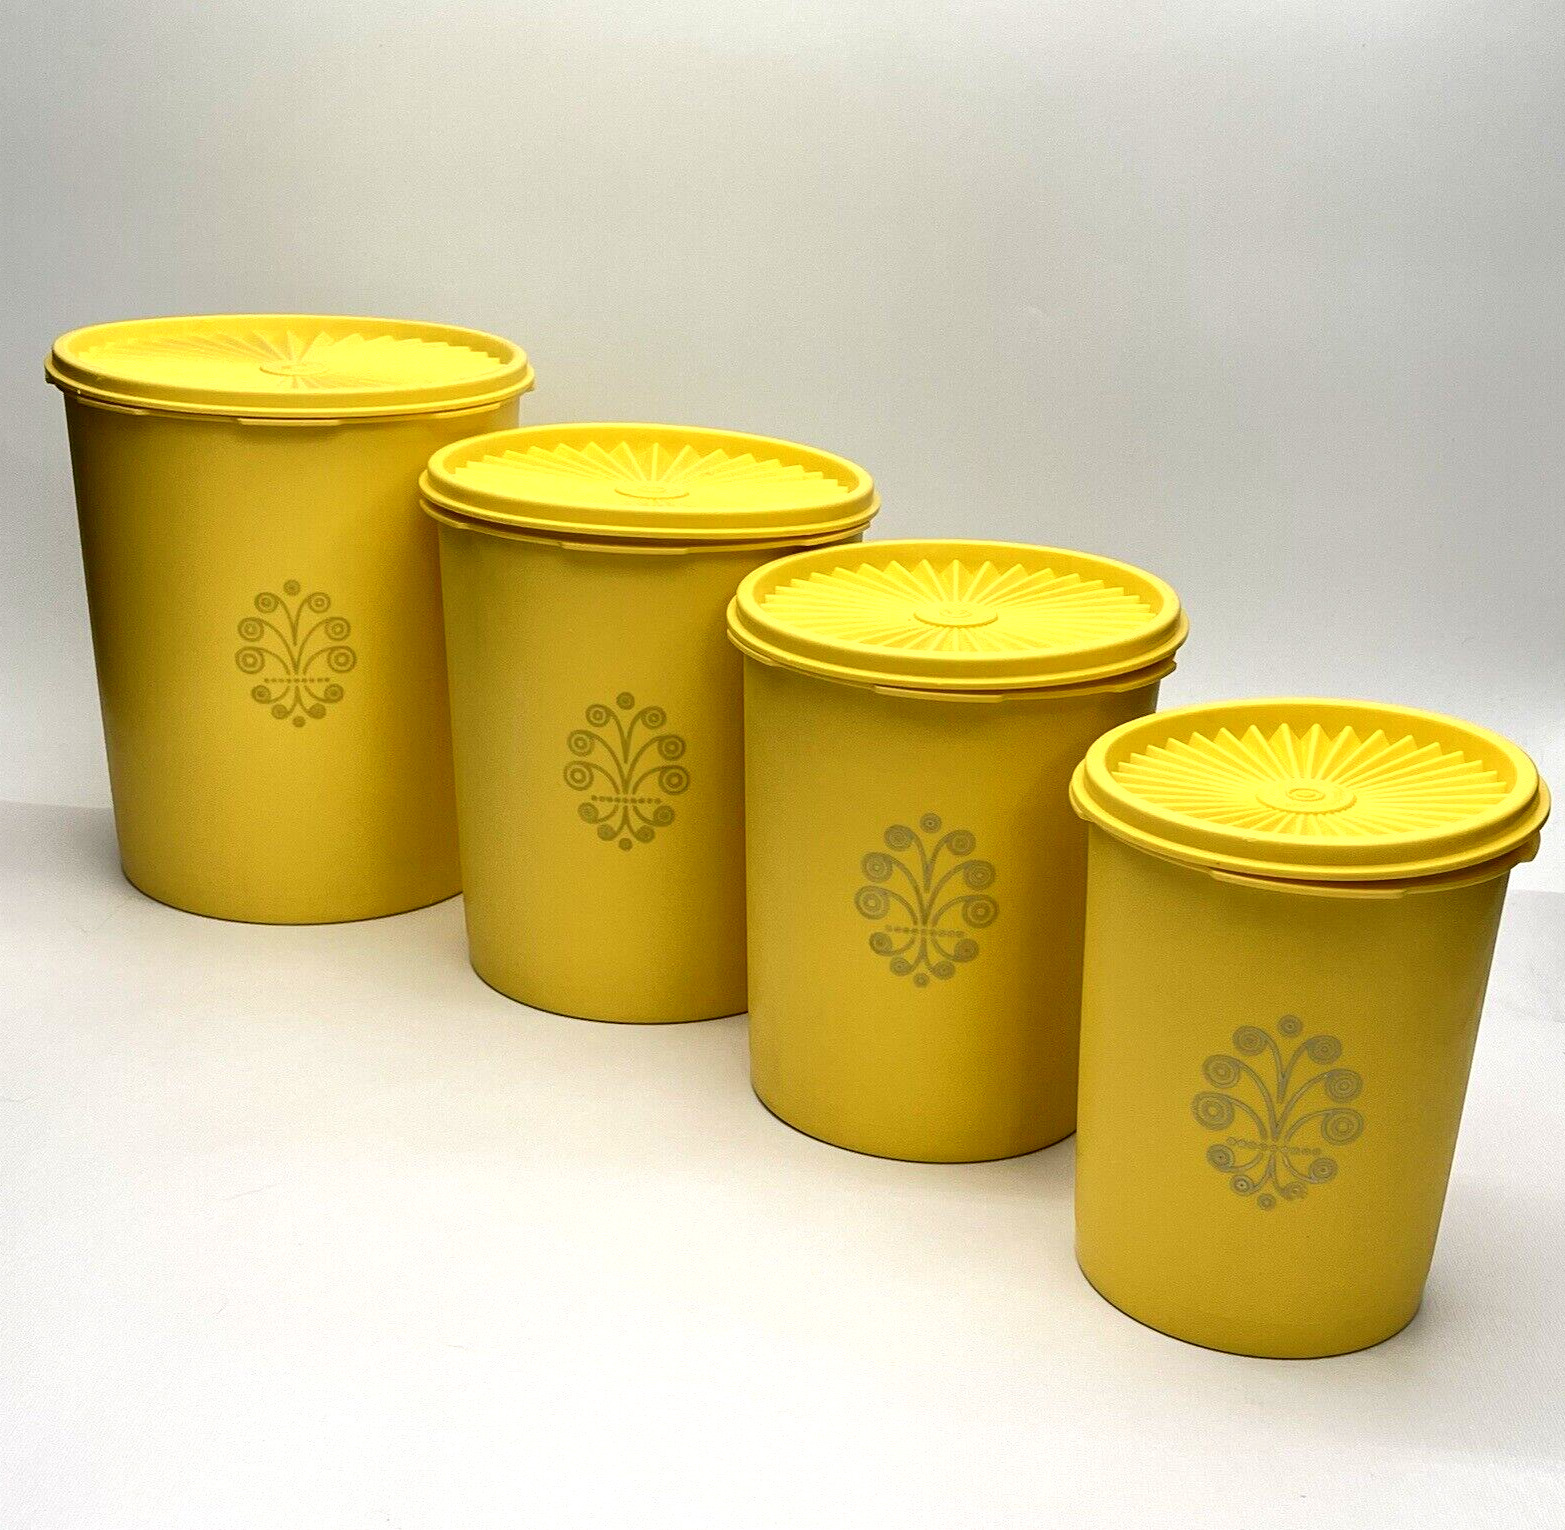 Vintage Tupperware Servalier Canisters Yellow Retro Nesting Set of 4 With Lids